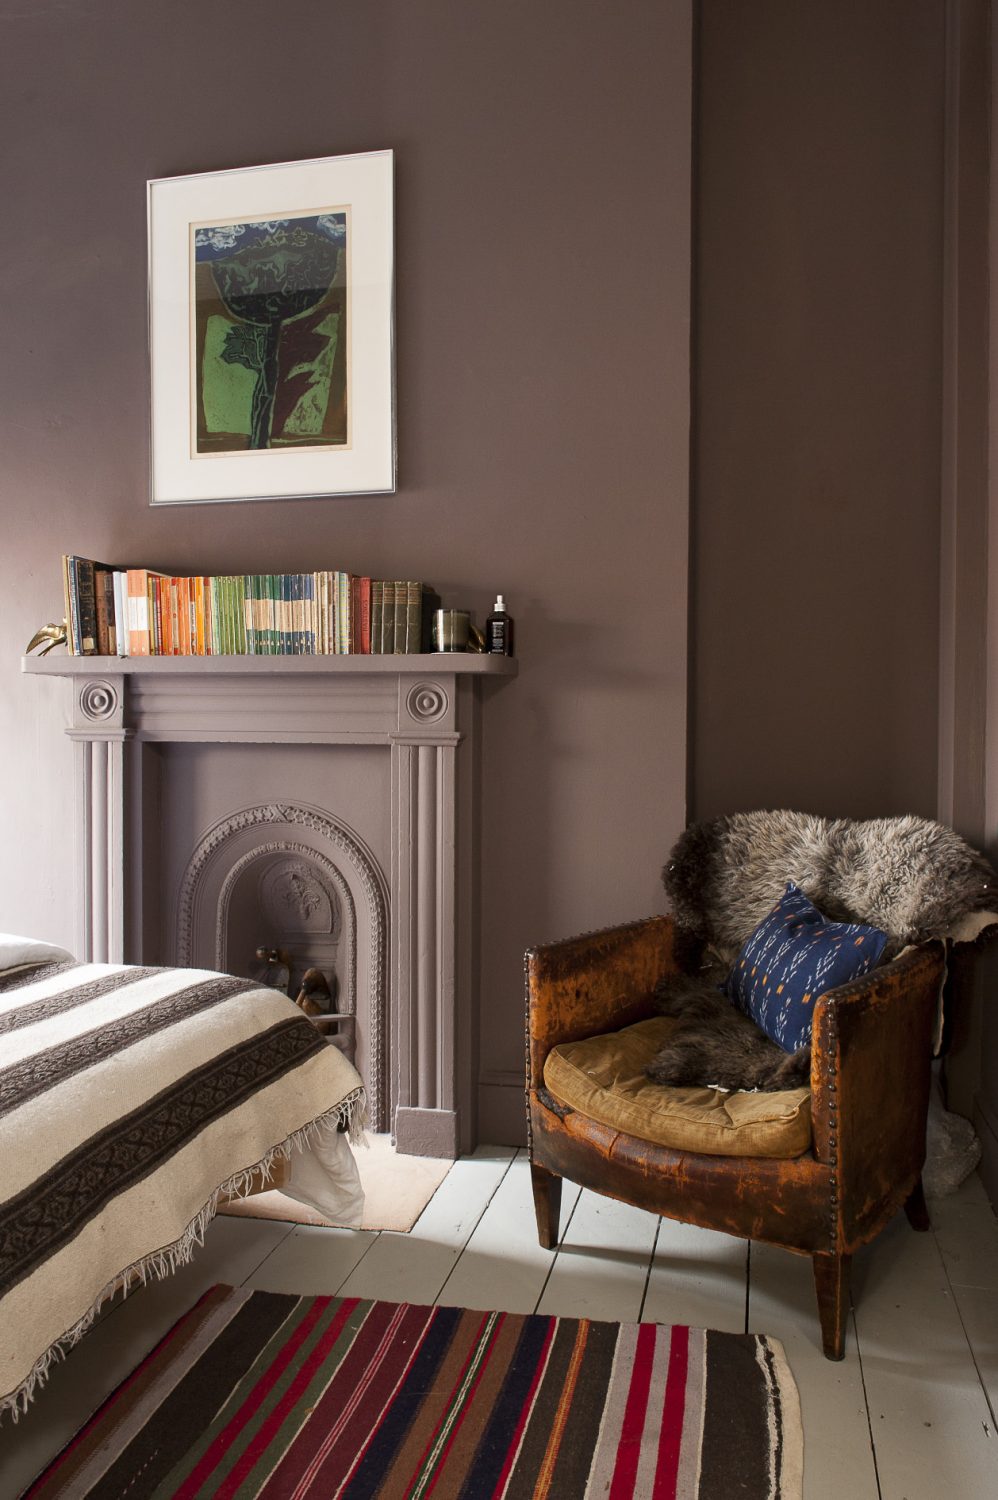 Classic novels sit on a the mantelpiece in the bedroom